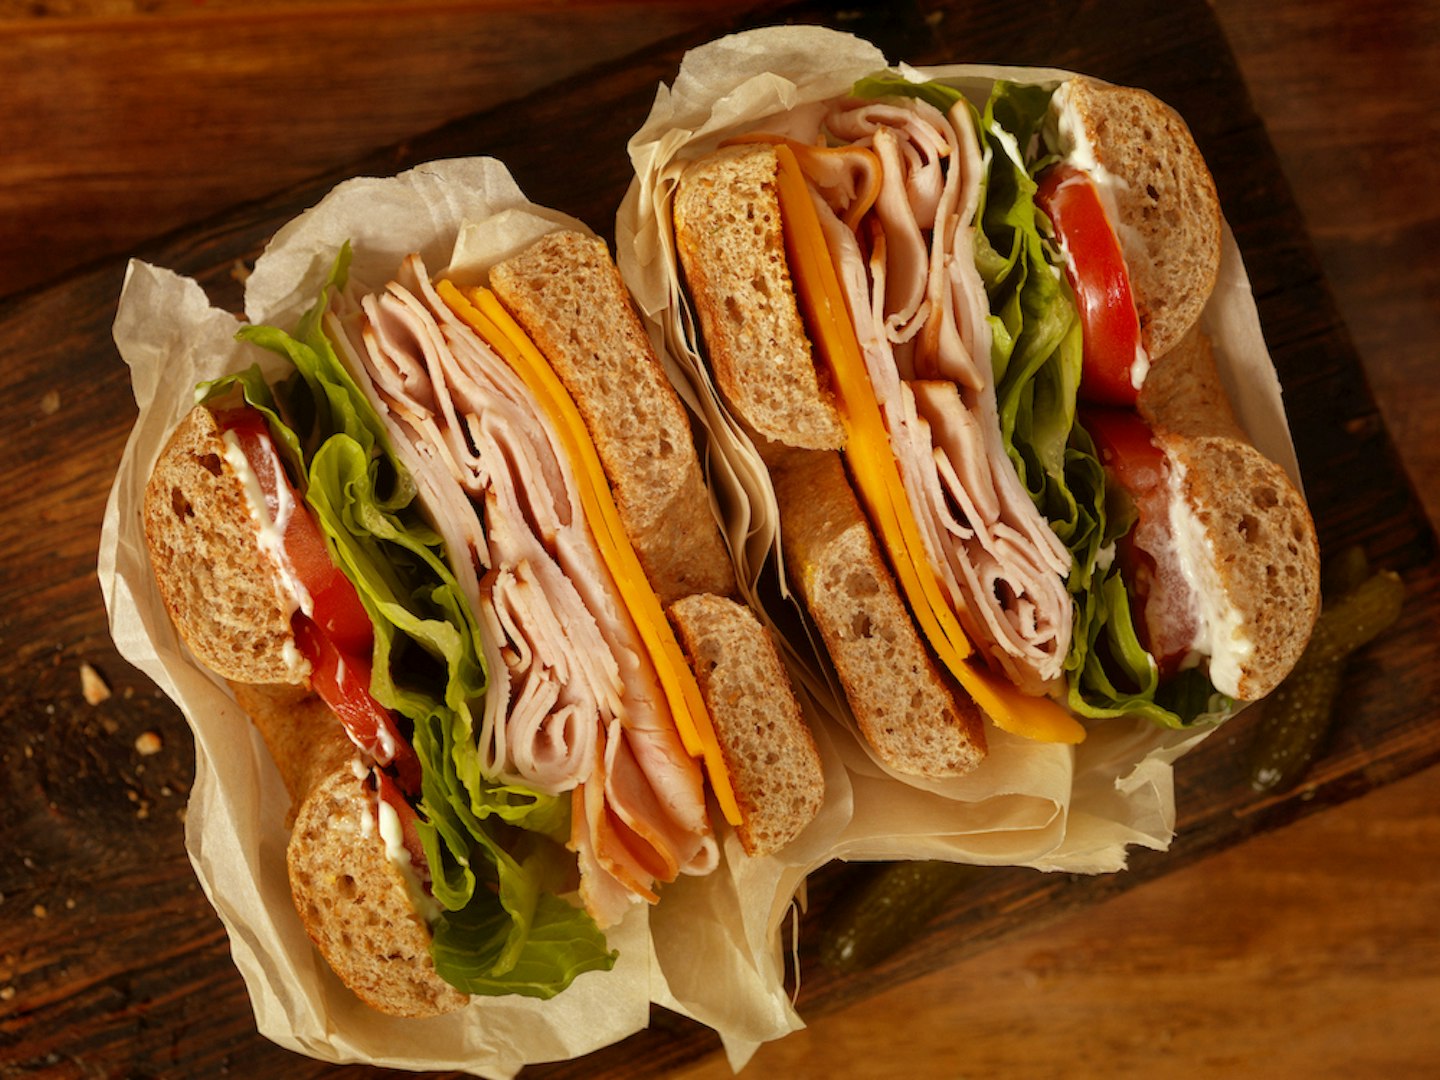 Back to school lunch ideas: bagels